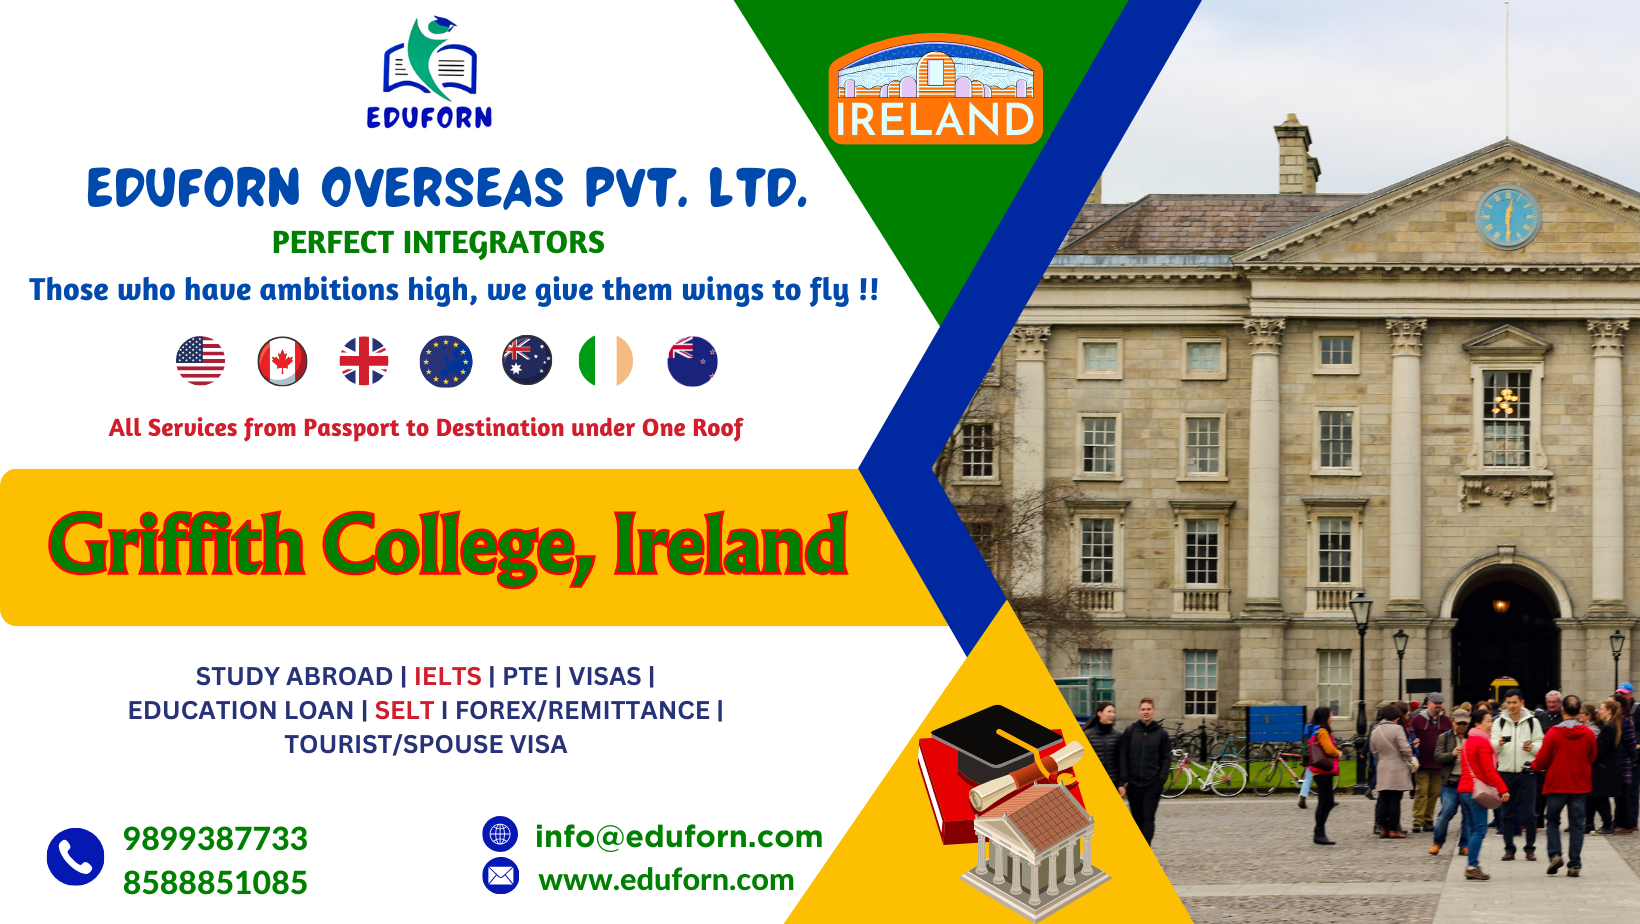 Griffith College, Ireland: Best Irish College for Quality Education